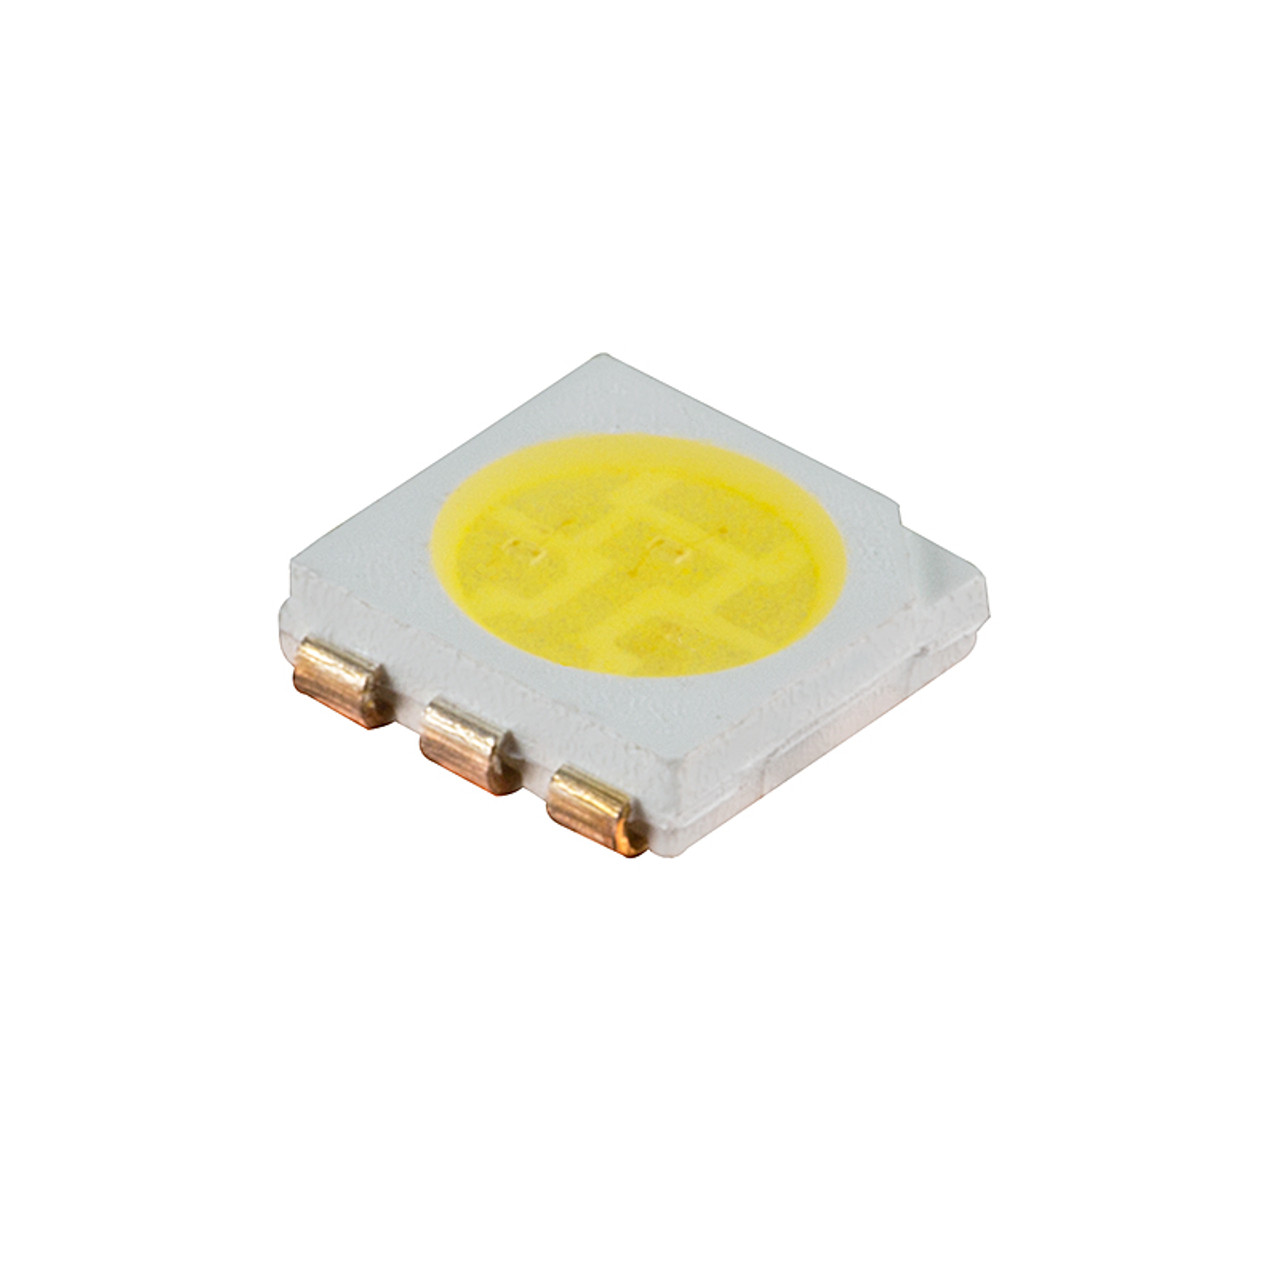 5050 SMD Led, Ultra Bright Diode - Warm White